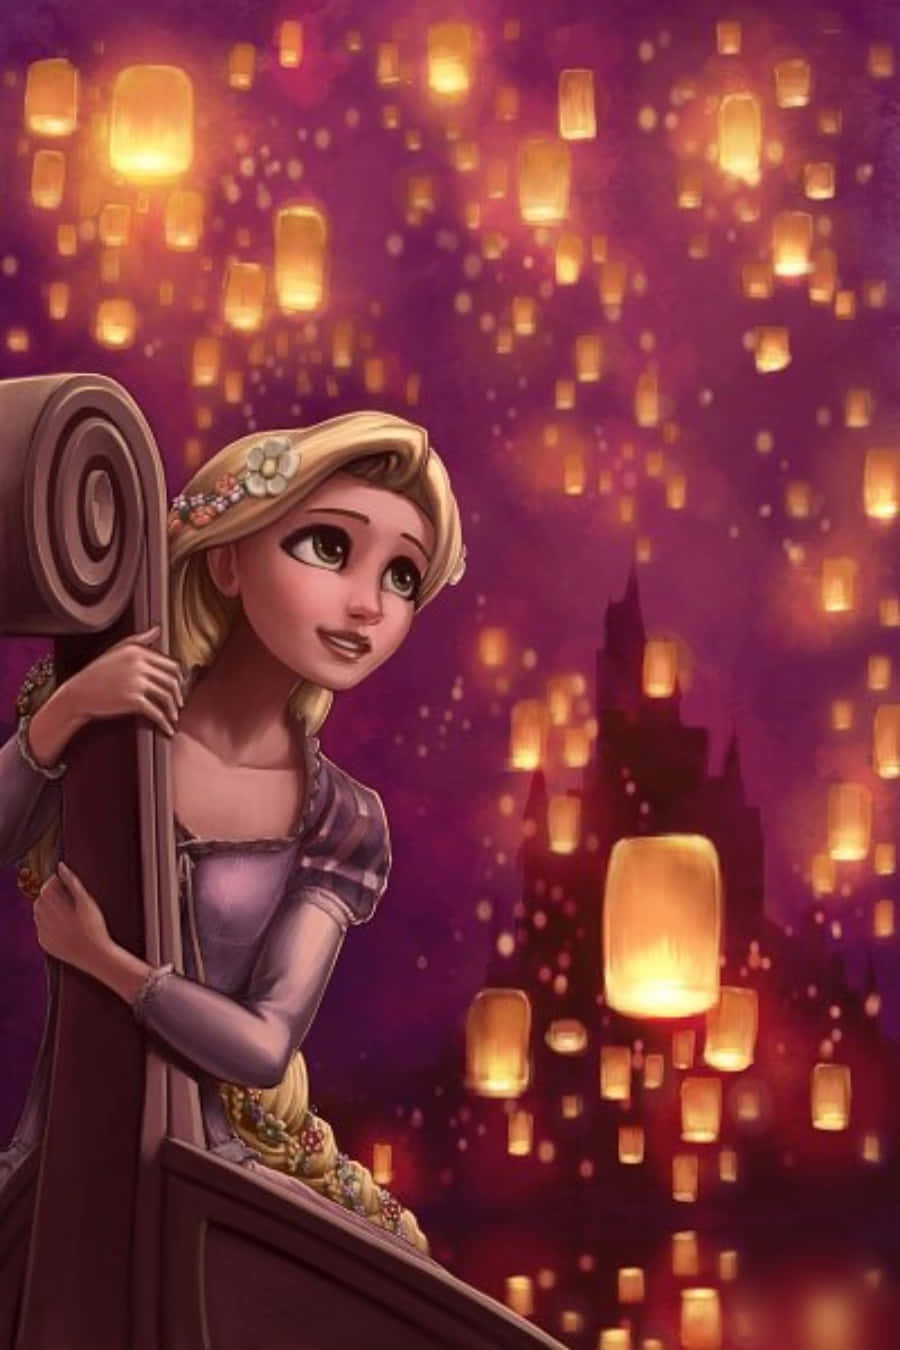 Rapunzel looks out of her tower with a dreamy expression.